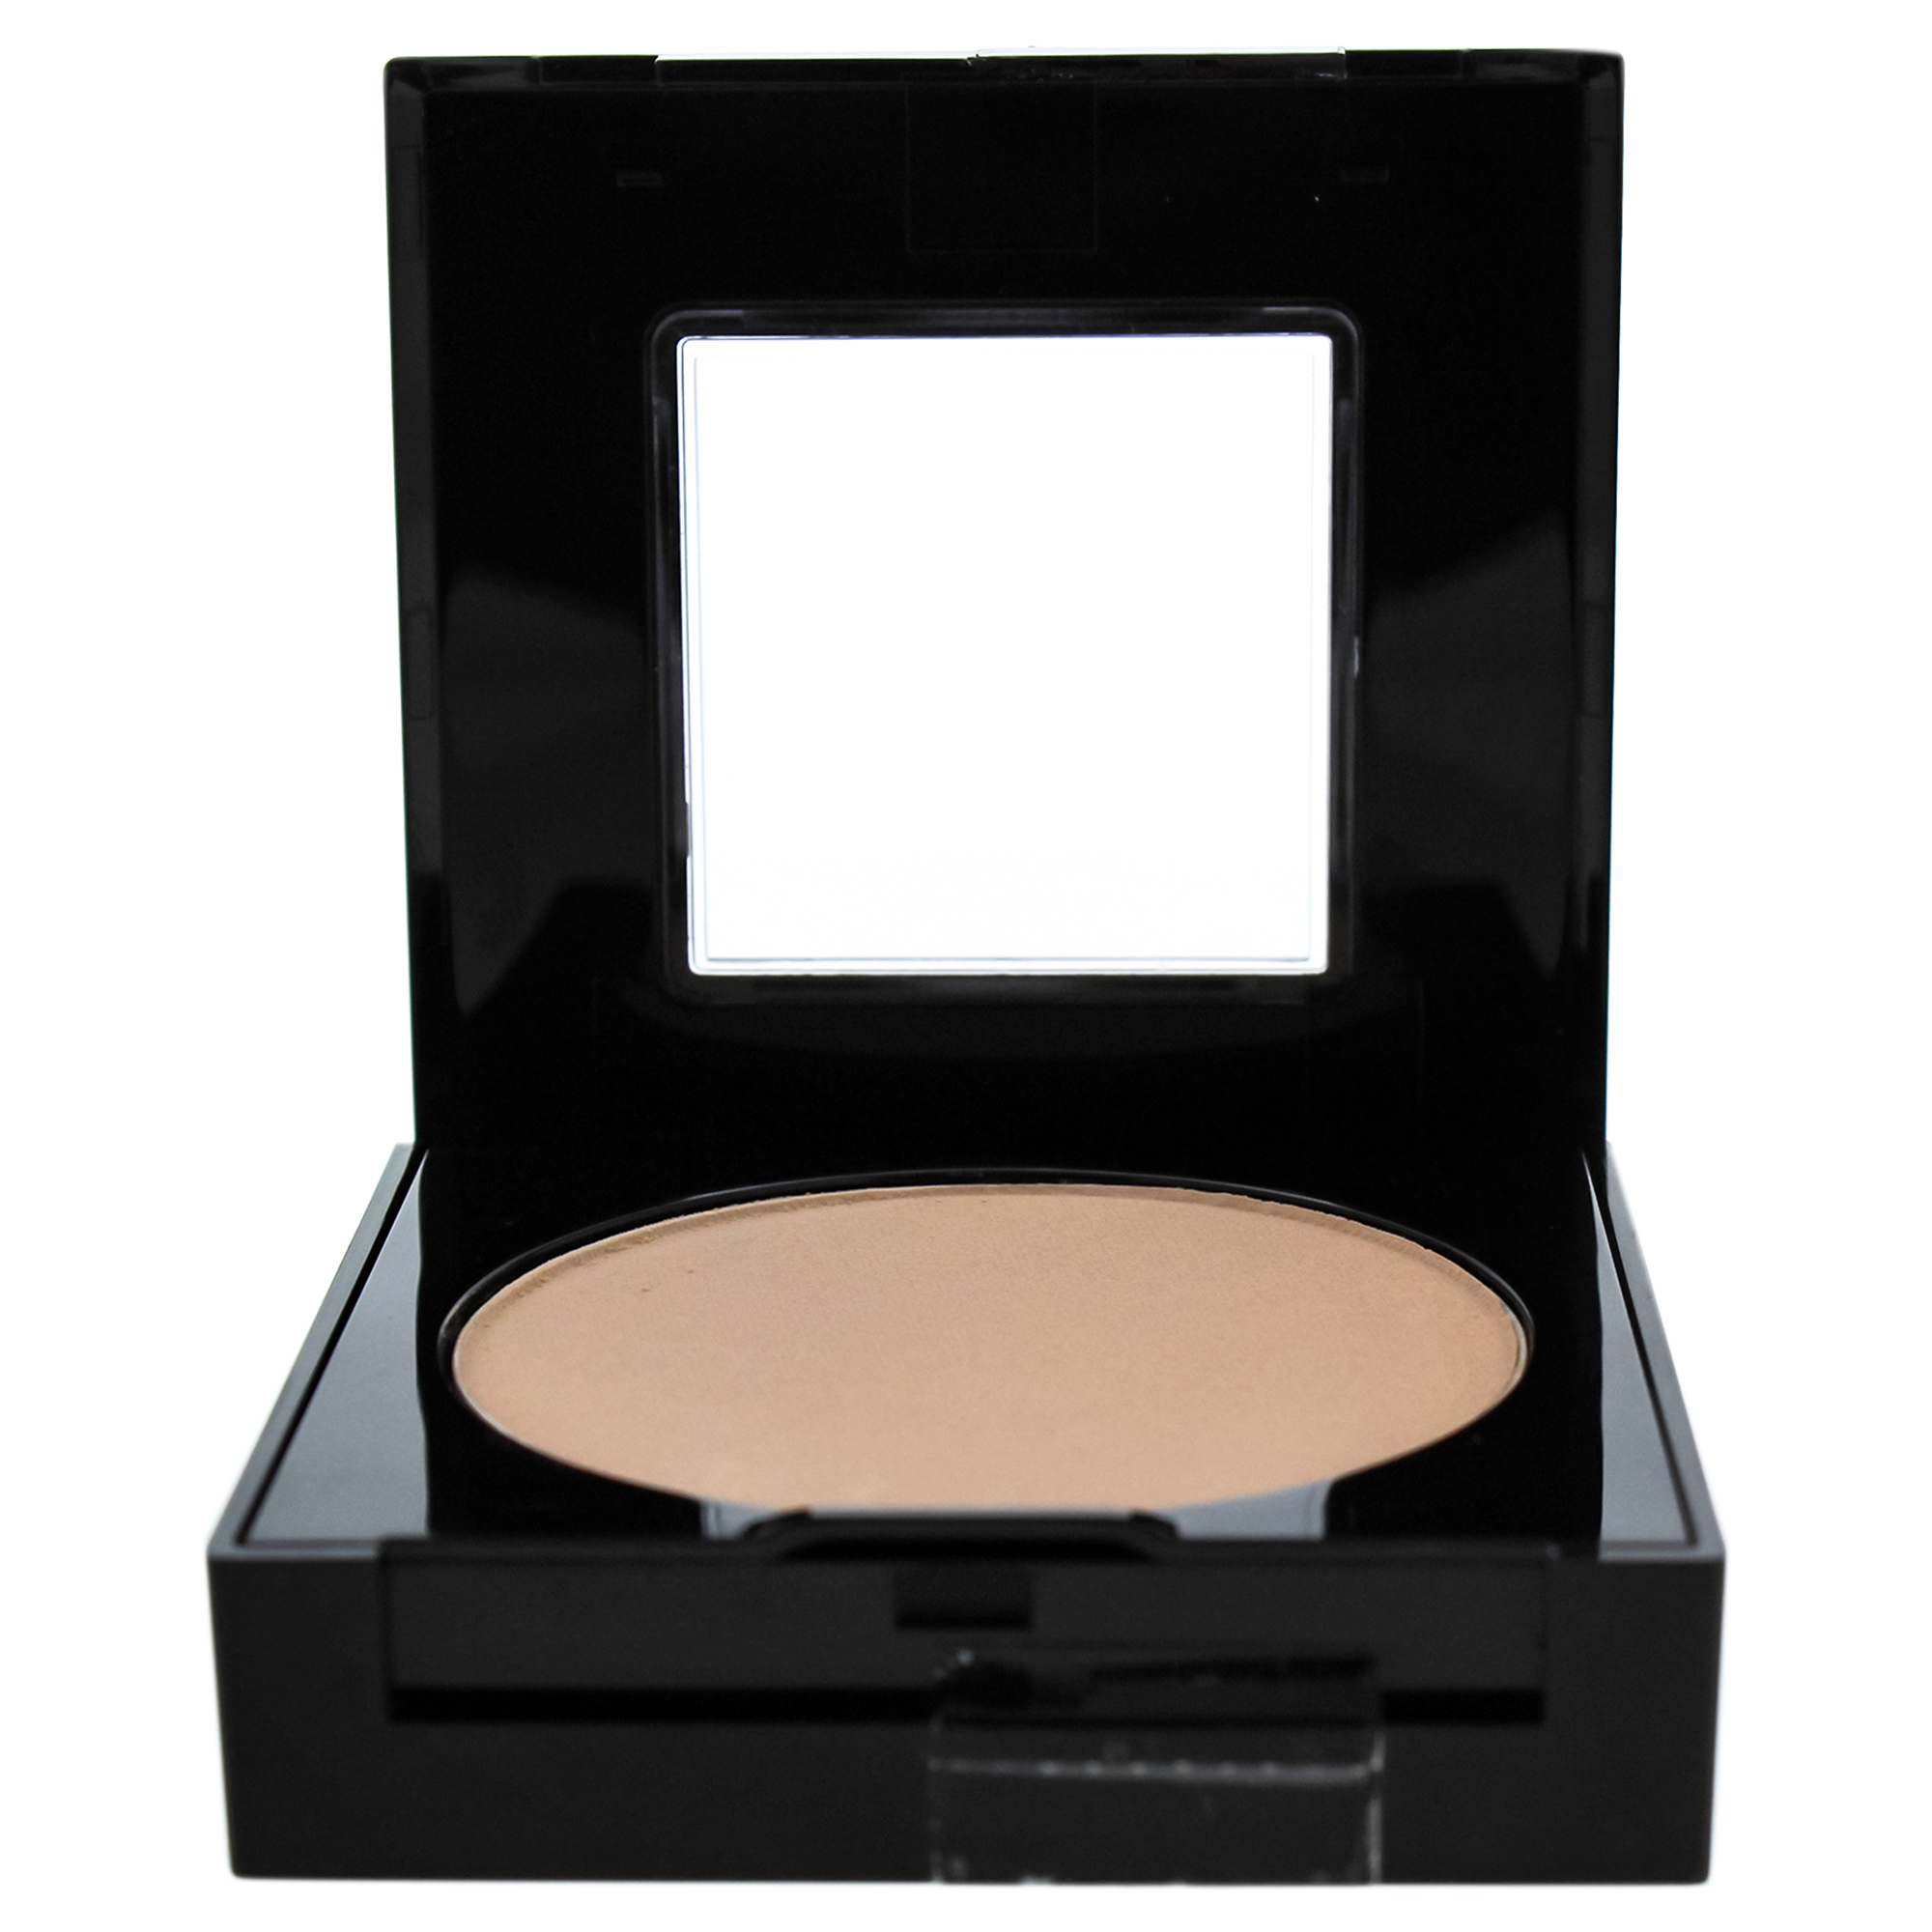 Maybelline Fit Me Set + Smooth Powder, Natural Buff - image 1 of 2